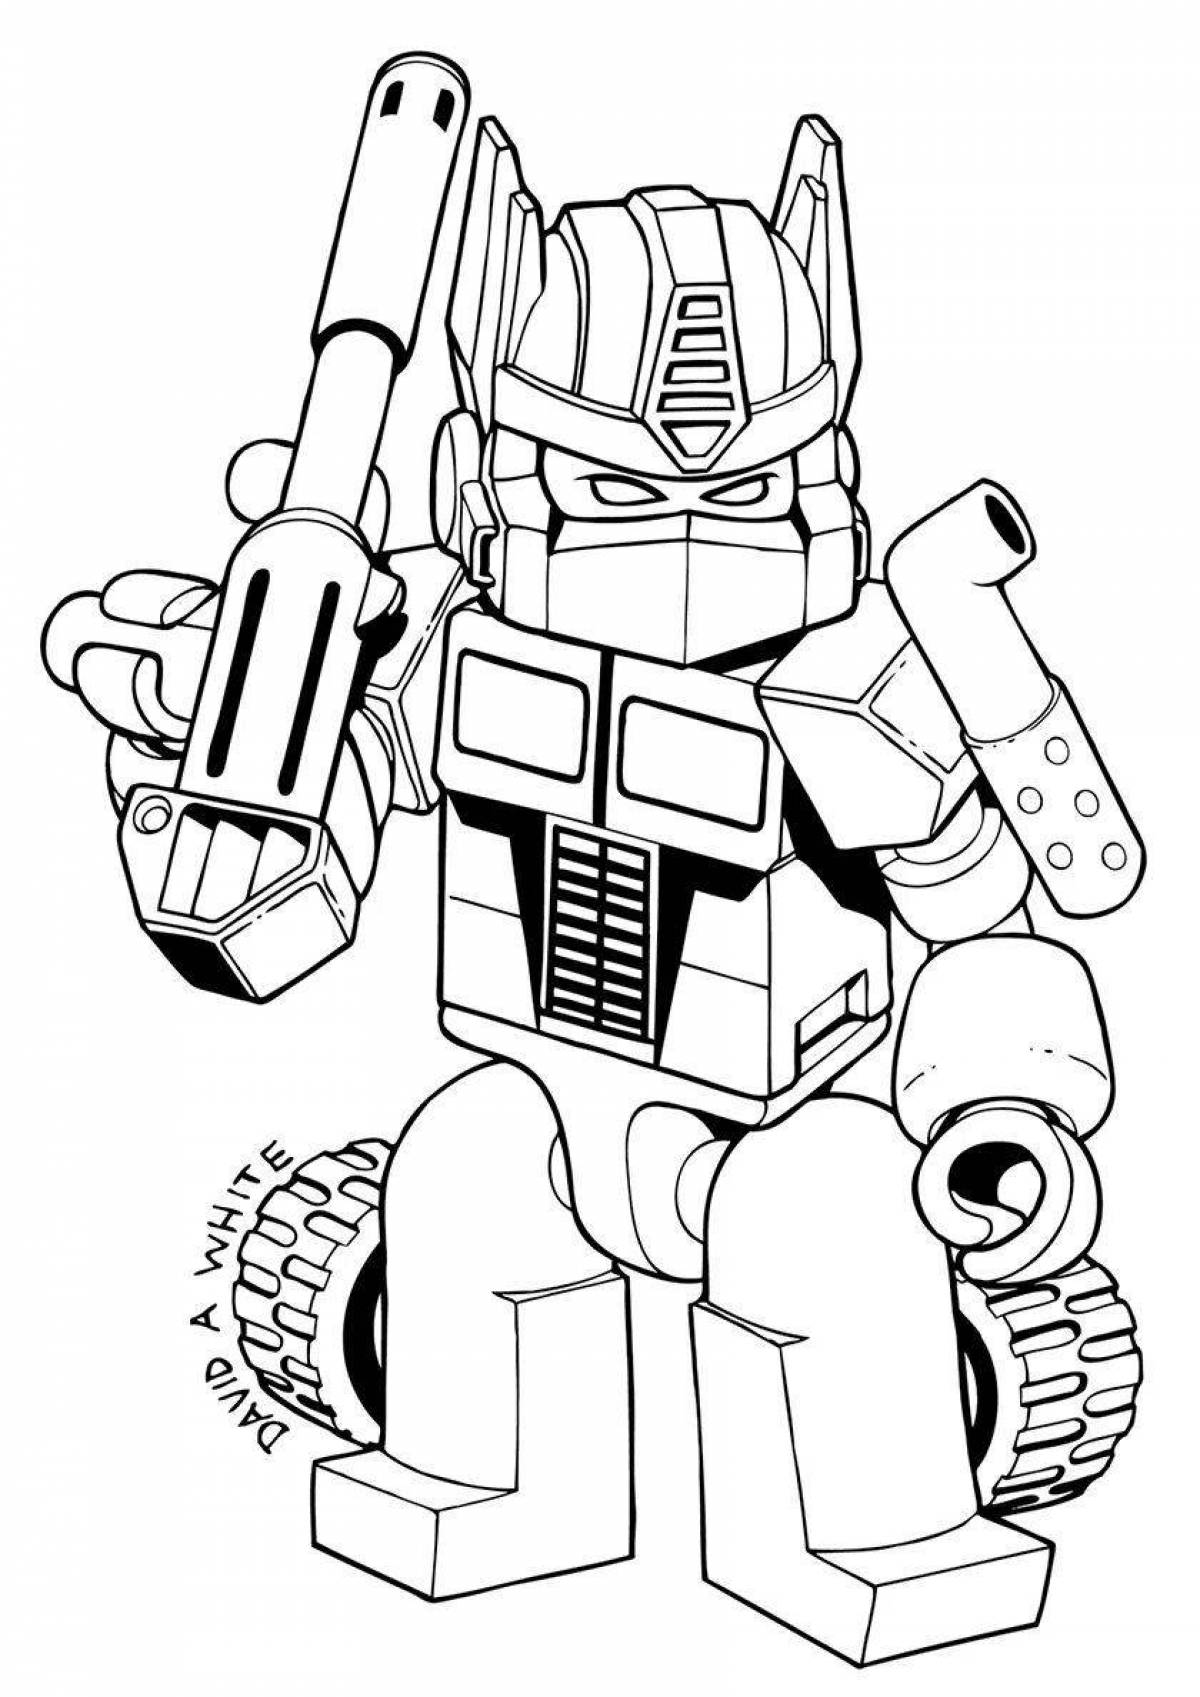 Adorable Autobot coloring book for kids